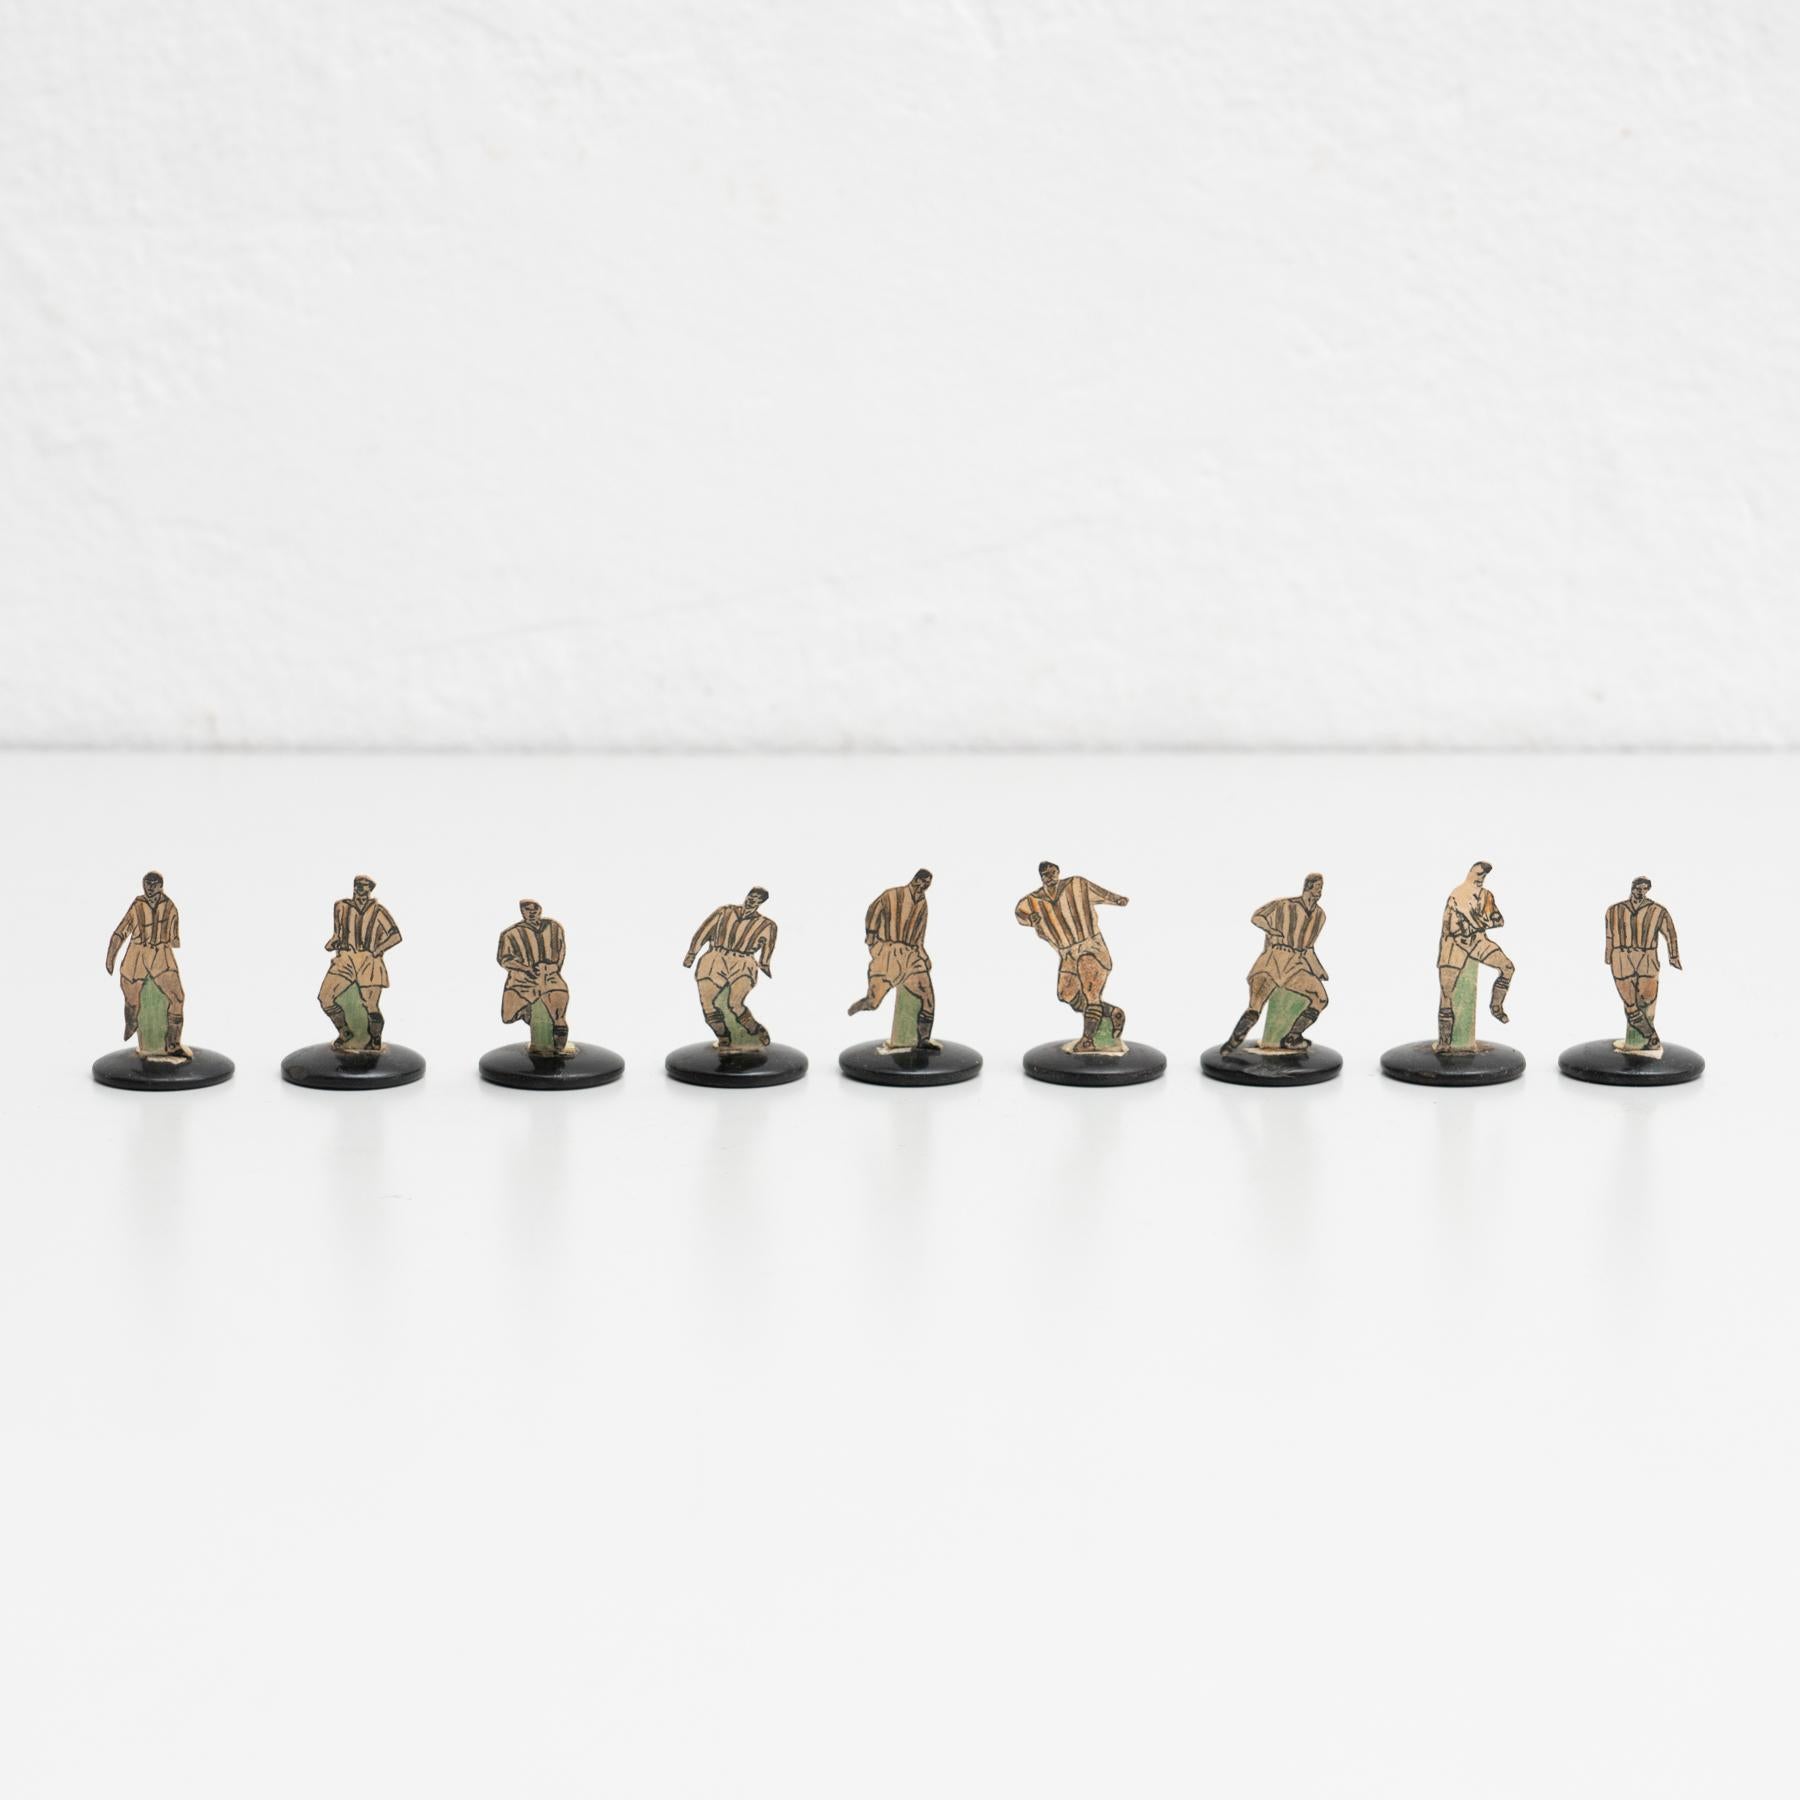 Set of nine table button soccer game players. Traditional figures used to play this classic button Spanish game. 

The players are build buy attaching a printed photography or drawing of an actual football soccer player to a clothing button.